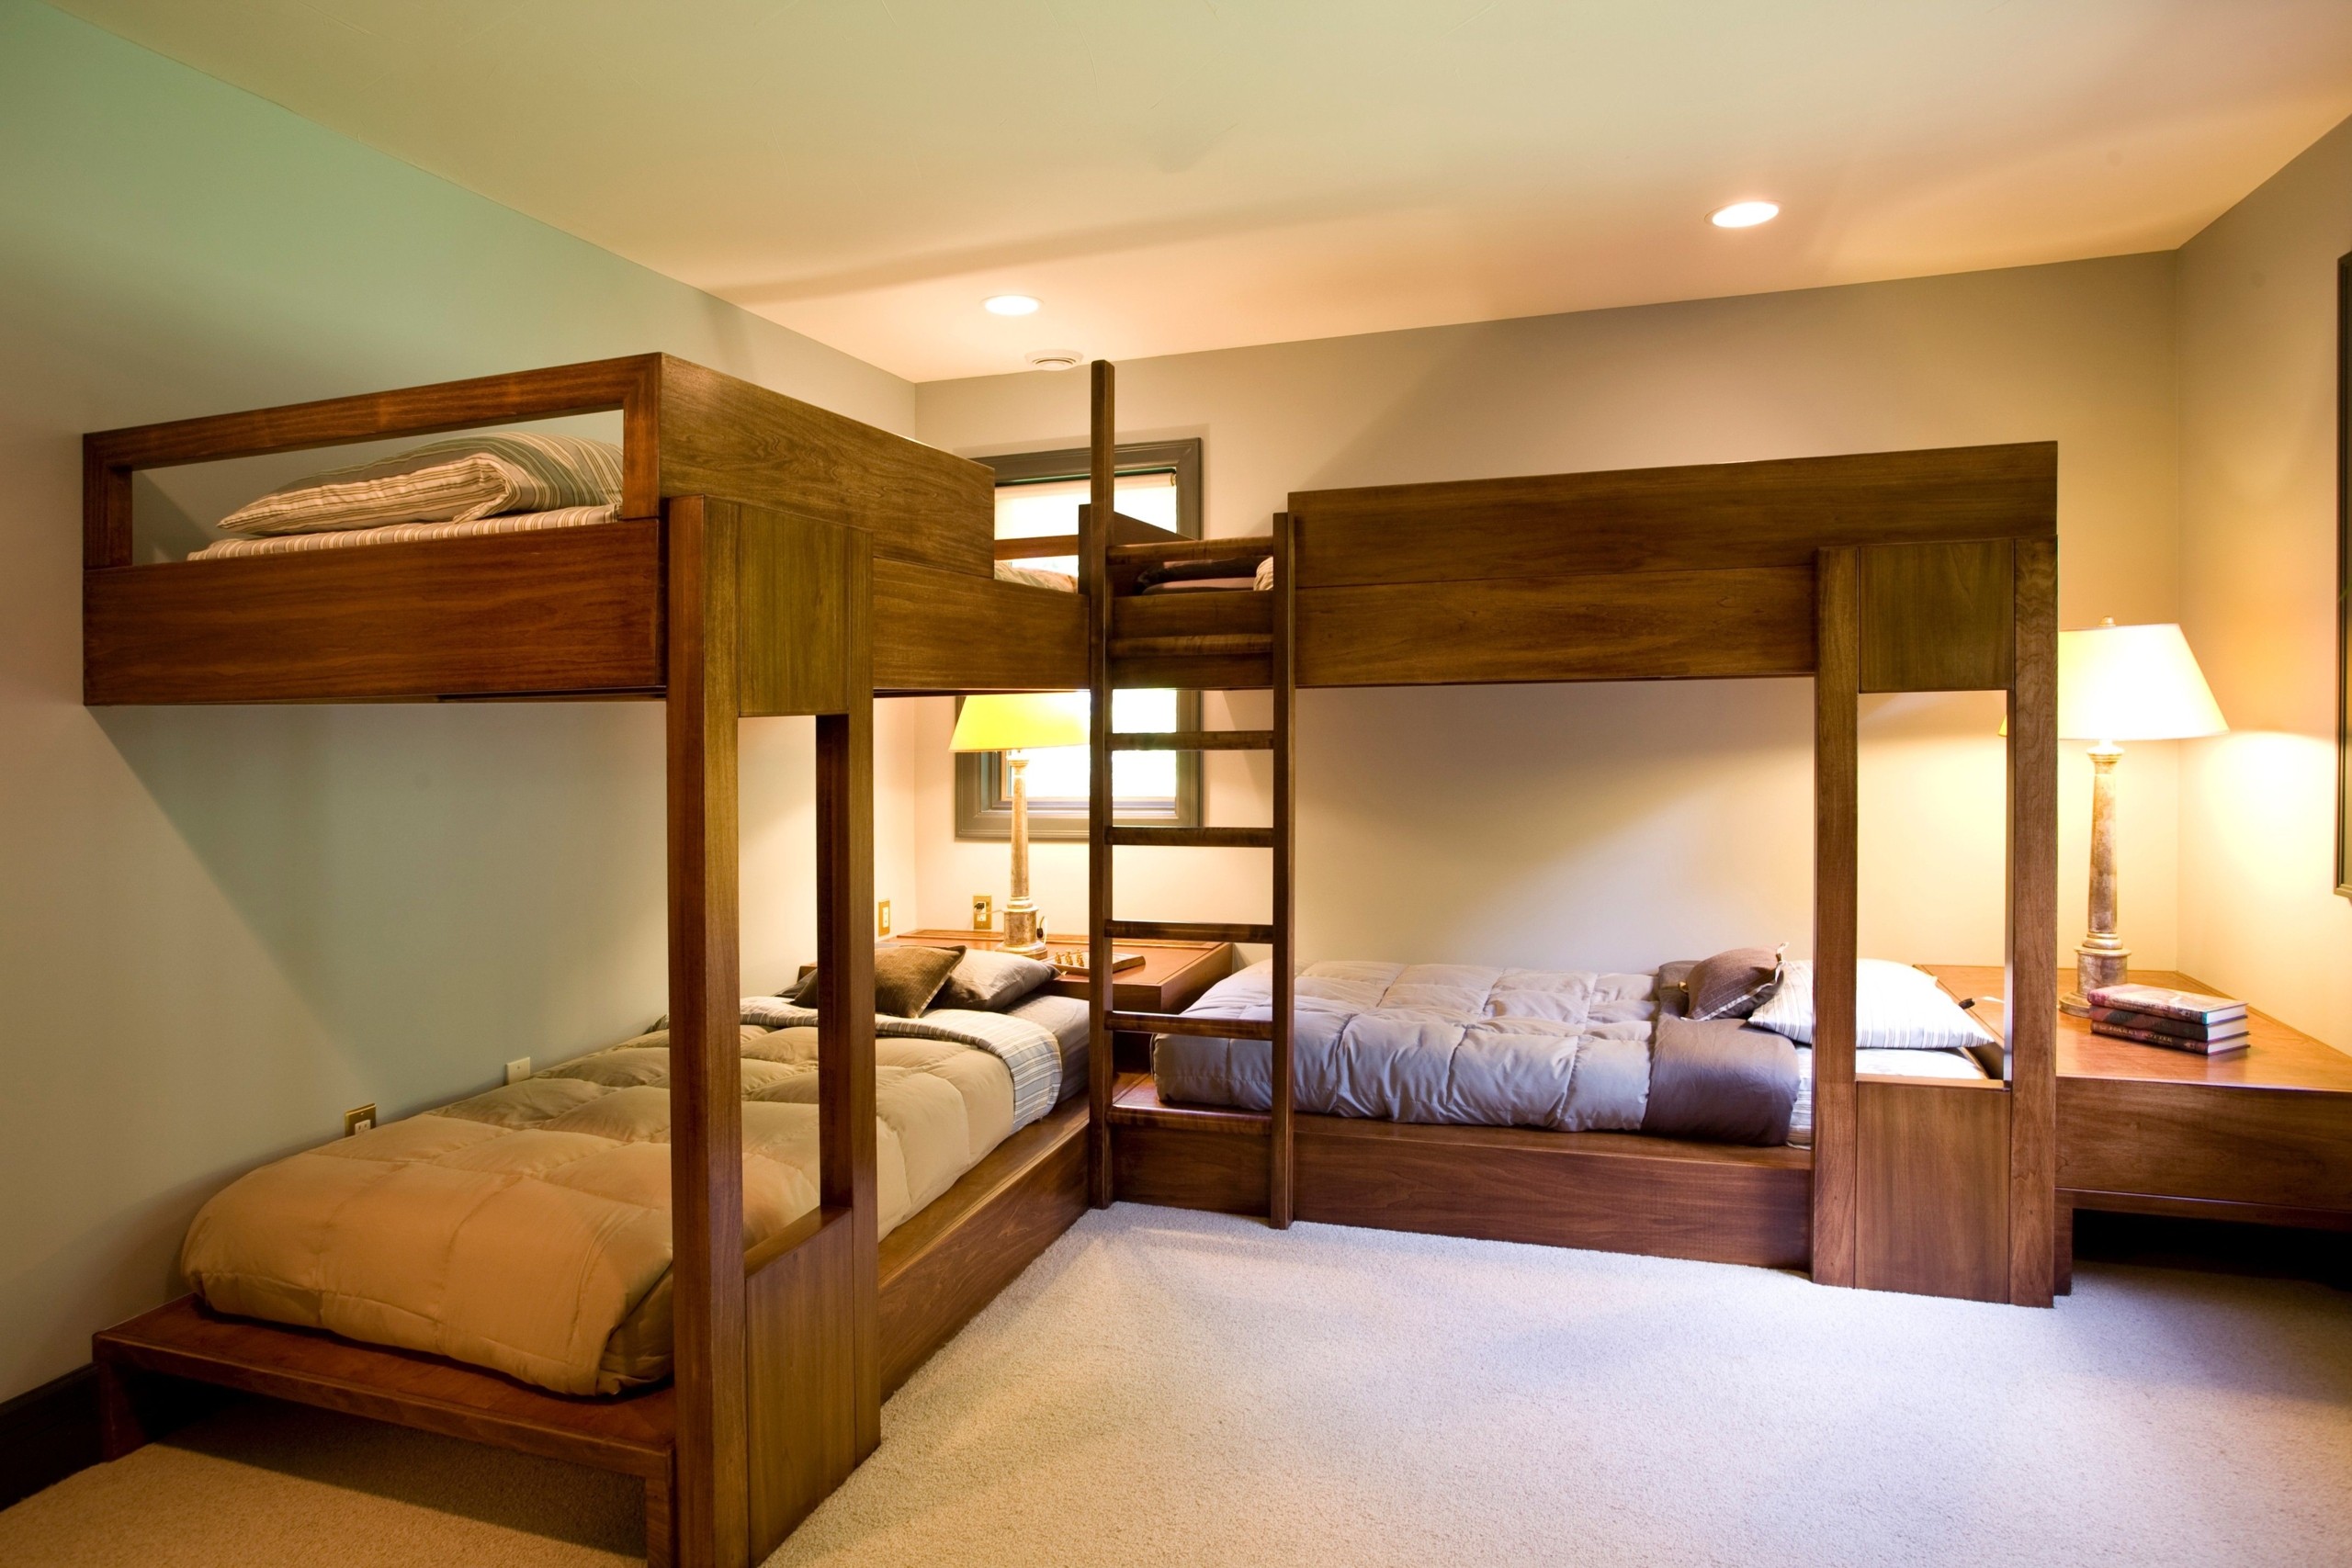 L shaped bunk beds twin over queen.